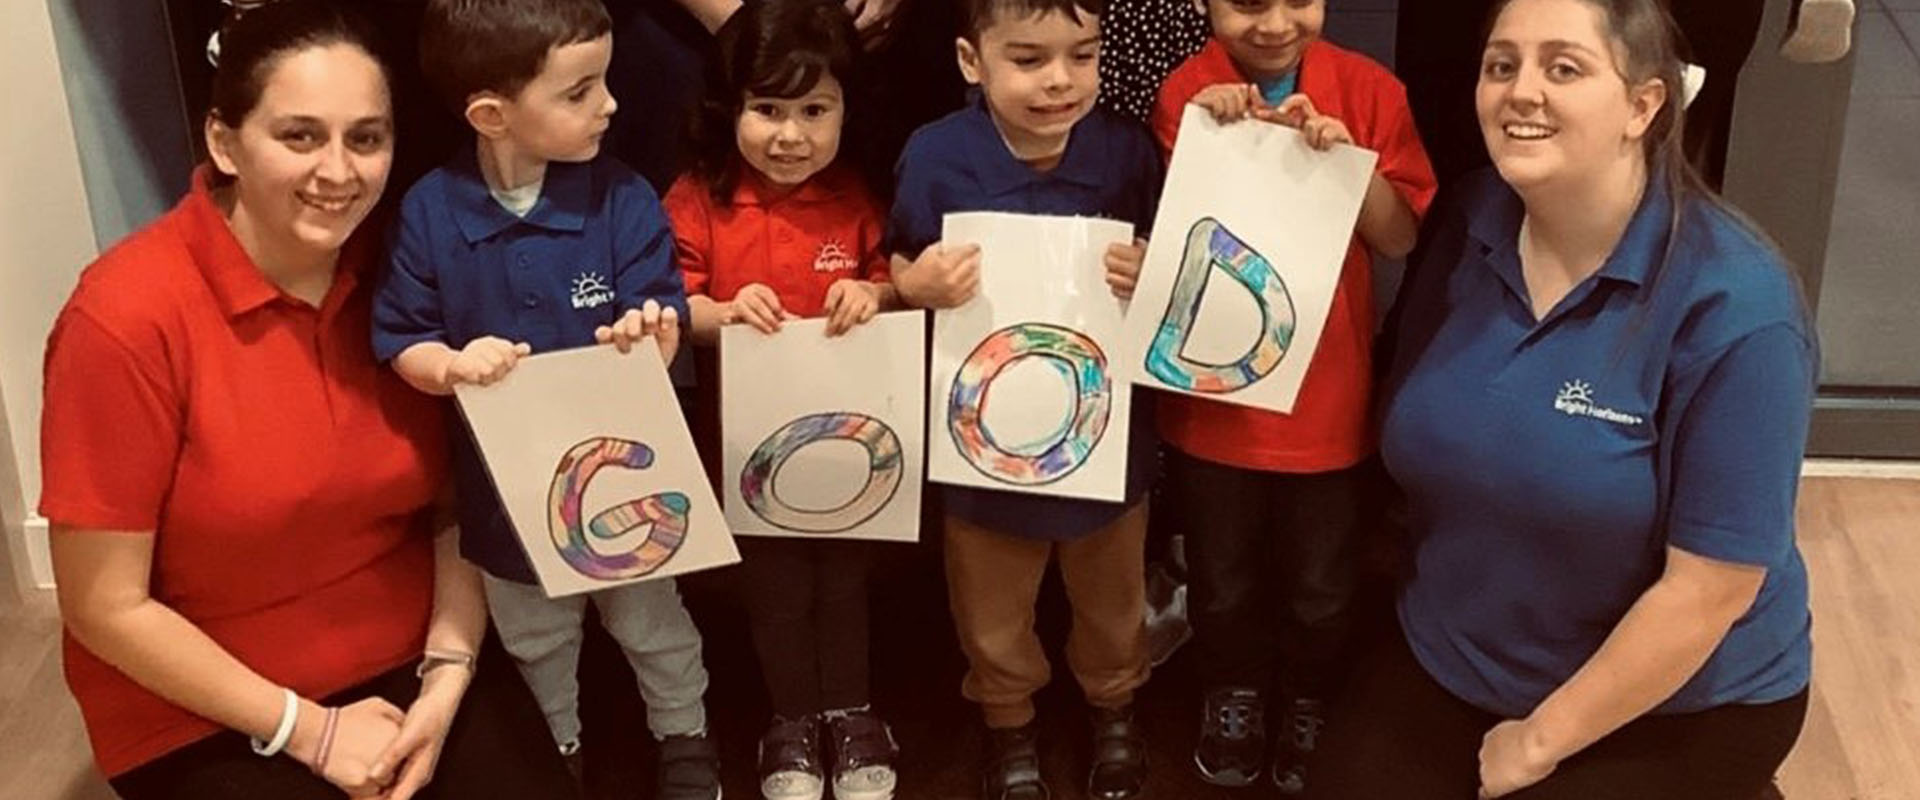 Didcot nursery receives Good rating from Ofsted